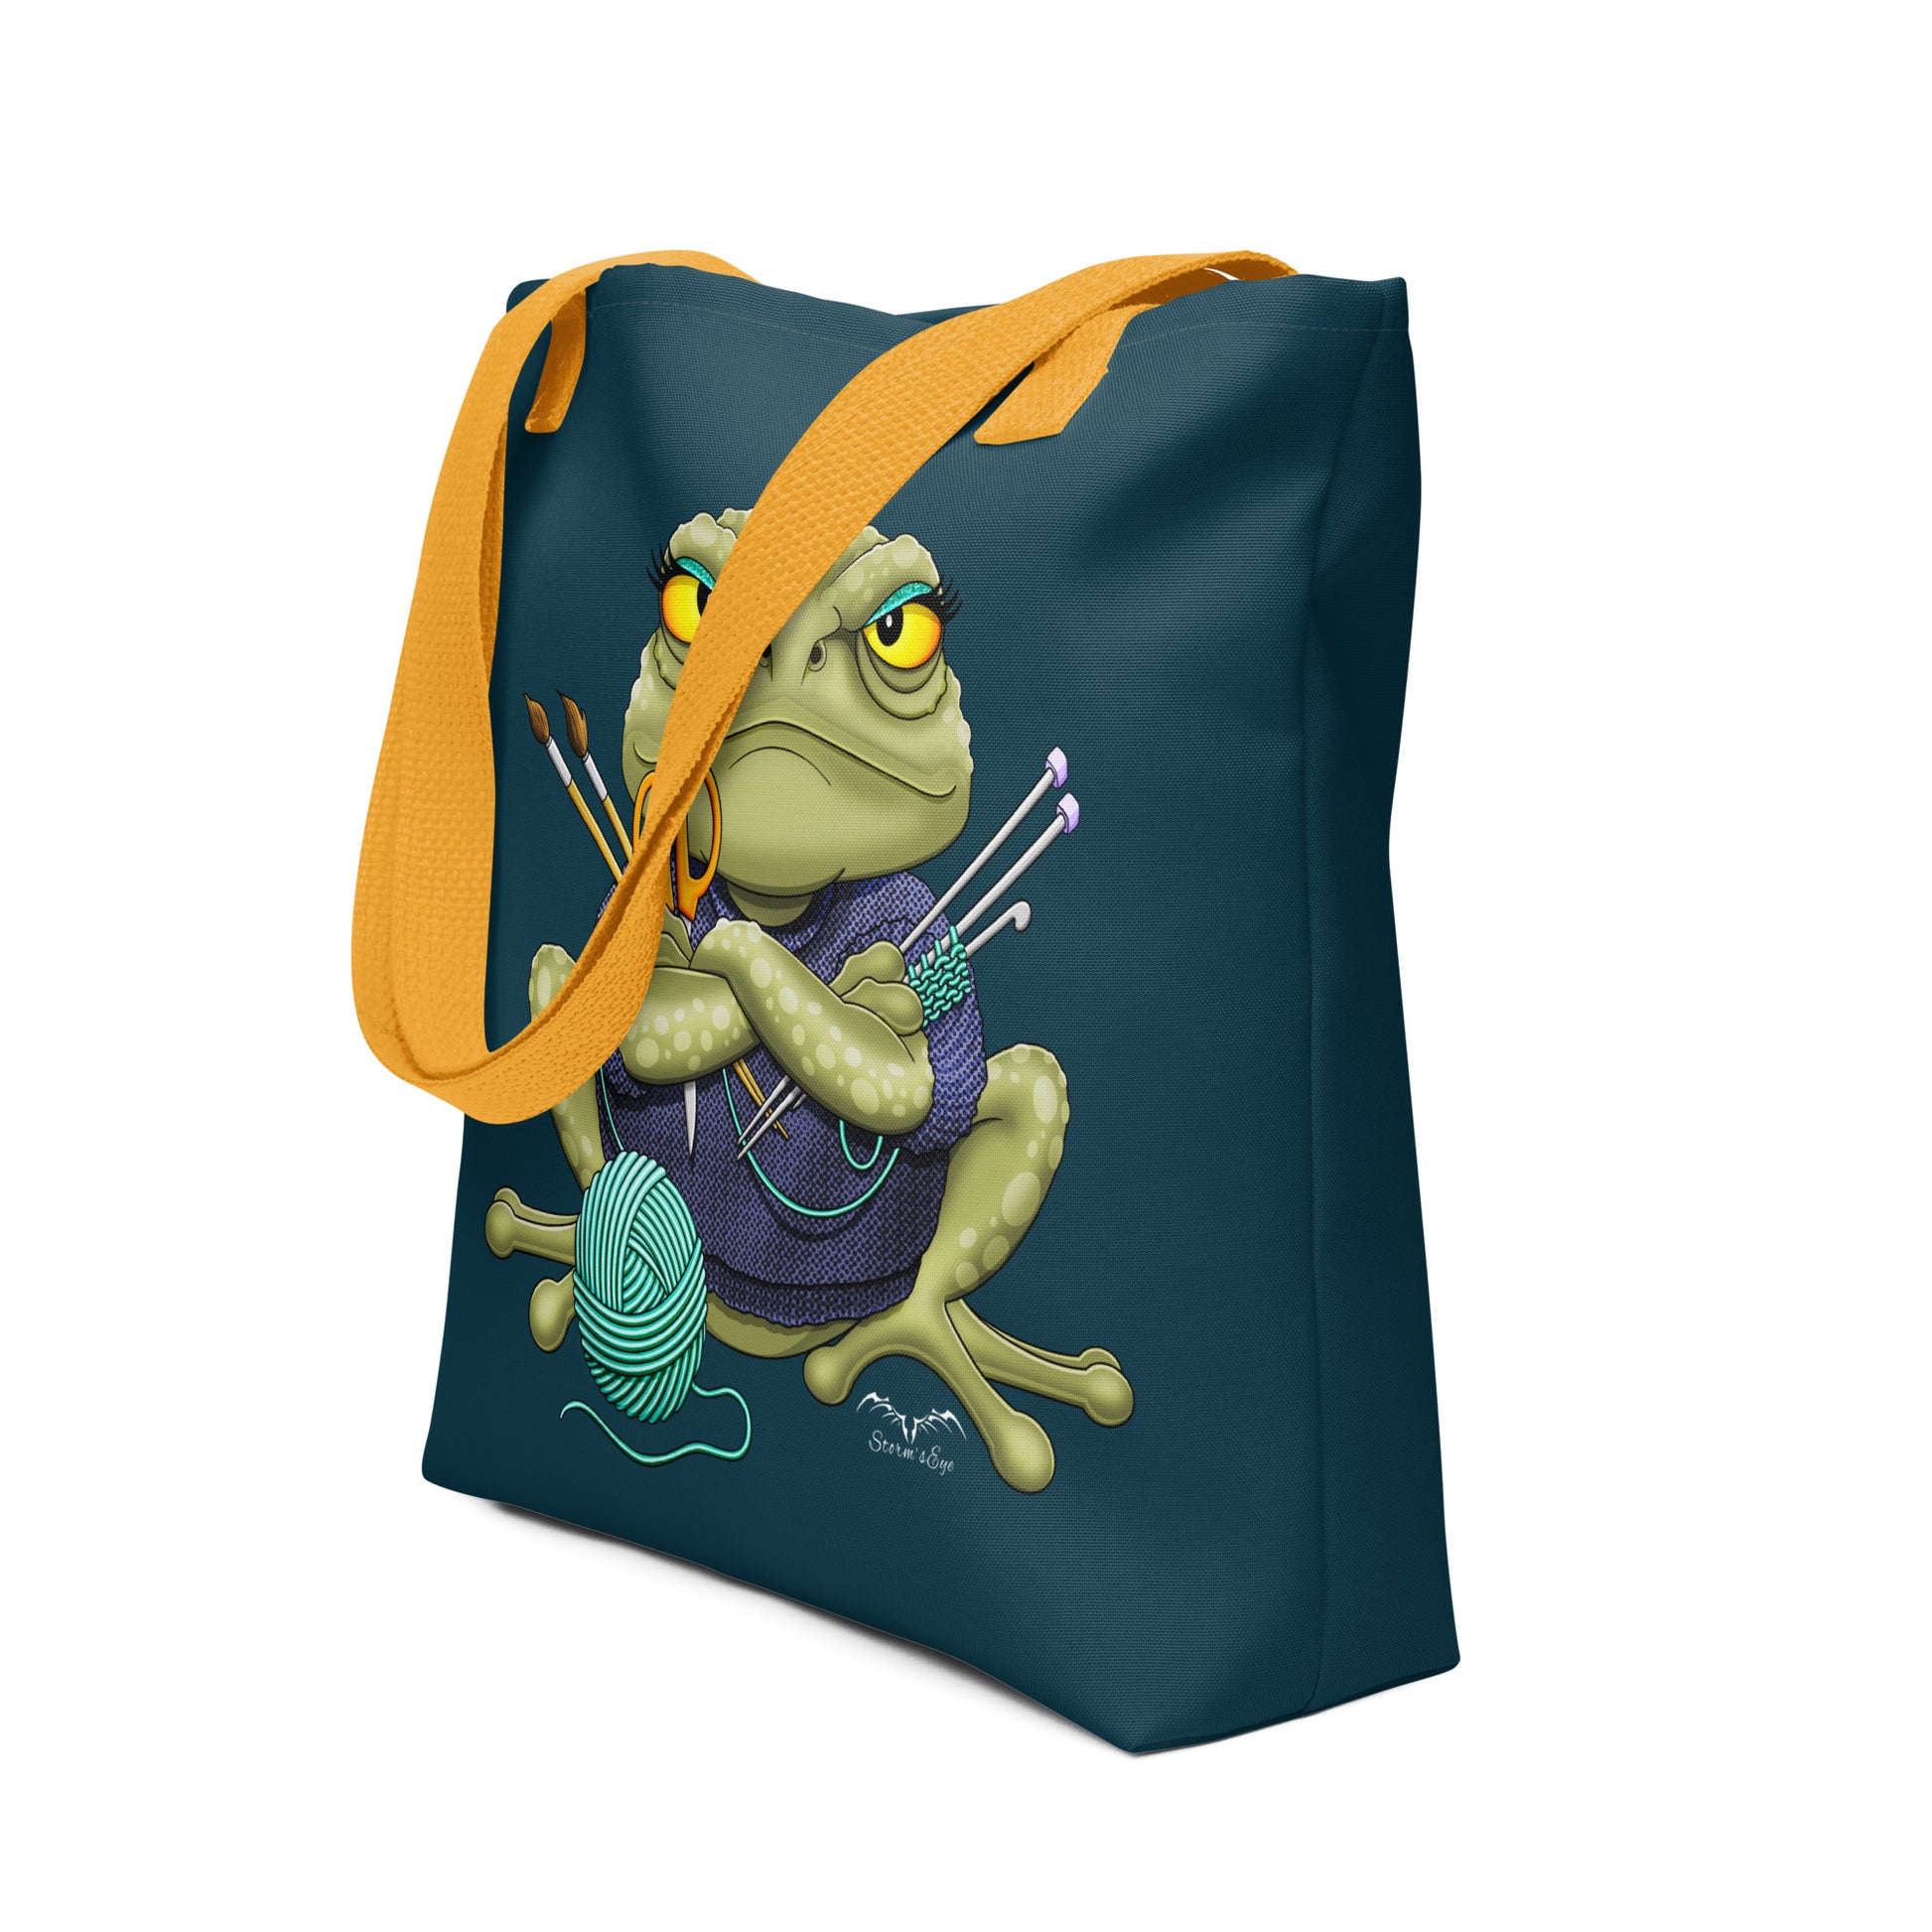 Stormseye design crafting frog large tote bag side view